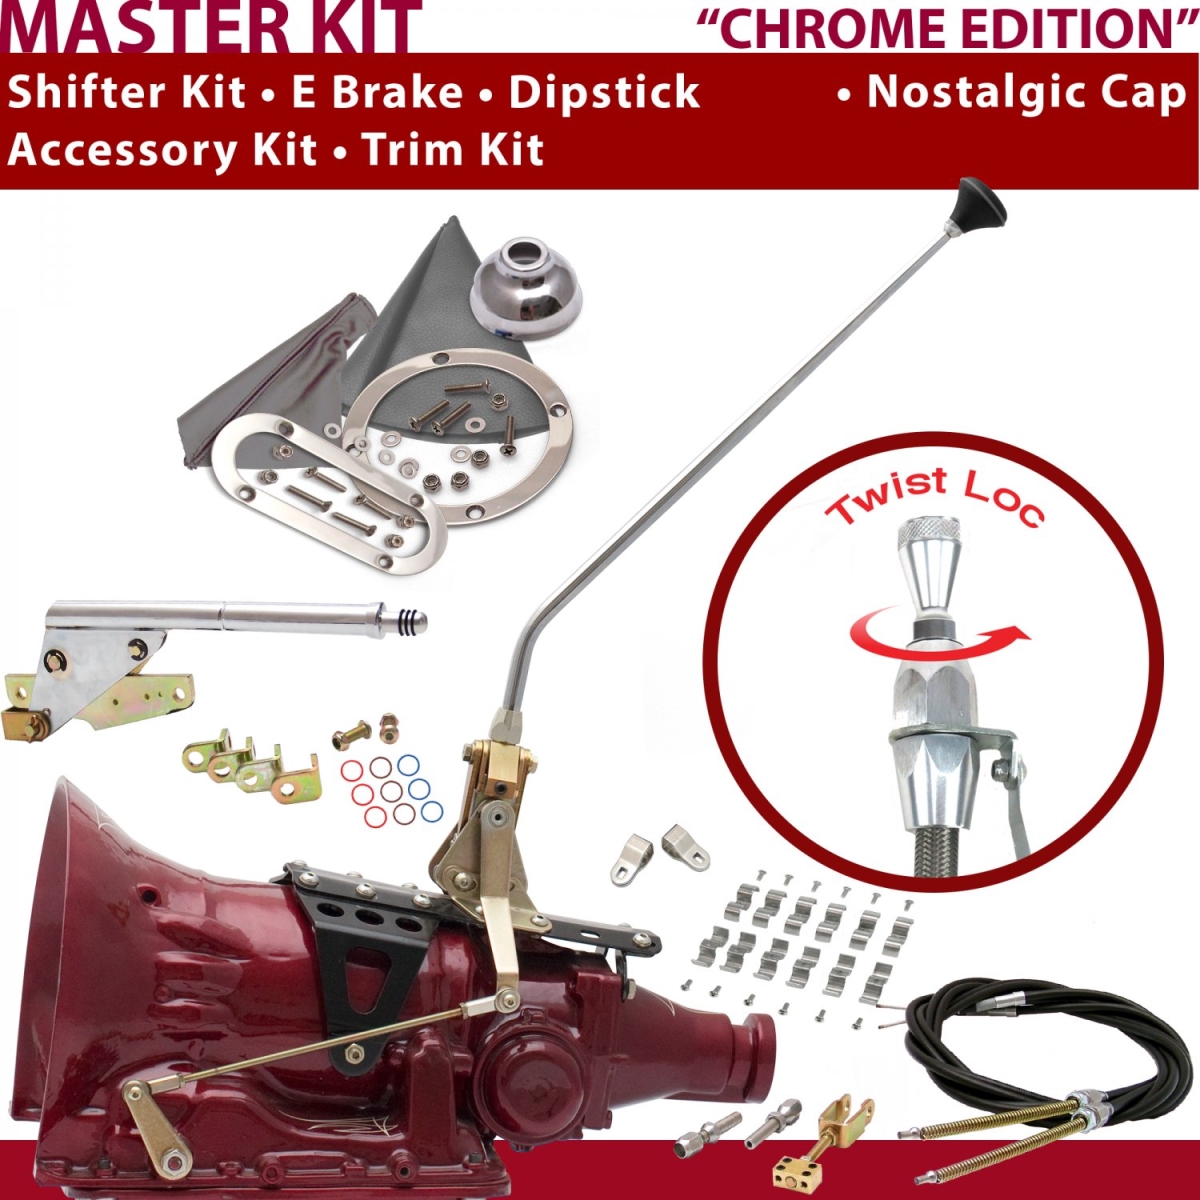 American Shifter 421116 4L80E Shifter Kit Chrome 16 in. E Brake Cable Clamp Clevis Trim Kit Dipstick for DB113 -  American Shifter Company